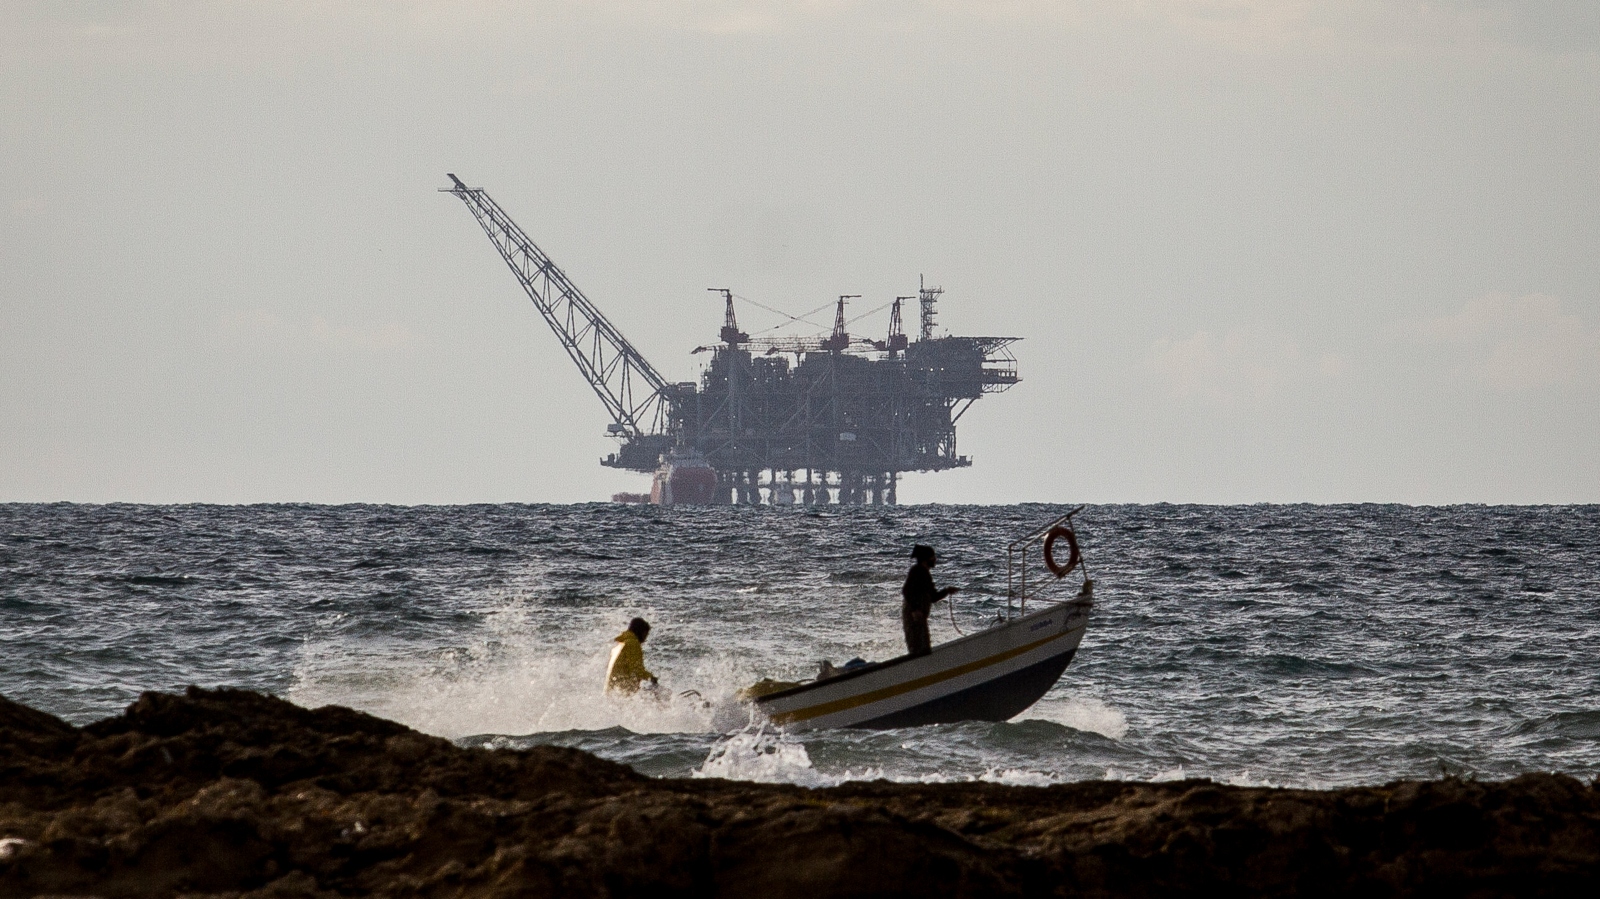 View of the Israeli Leviathan gas processing rig on January 1, 2020. Photo by Flash90